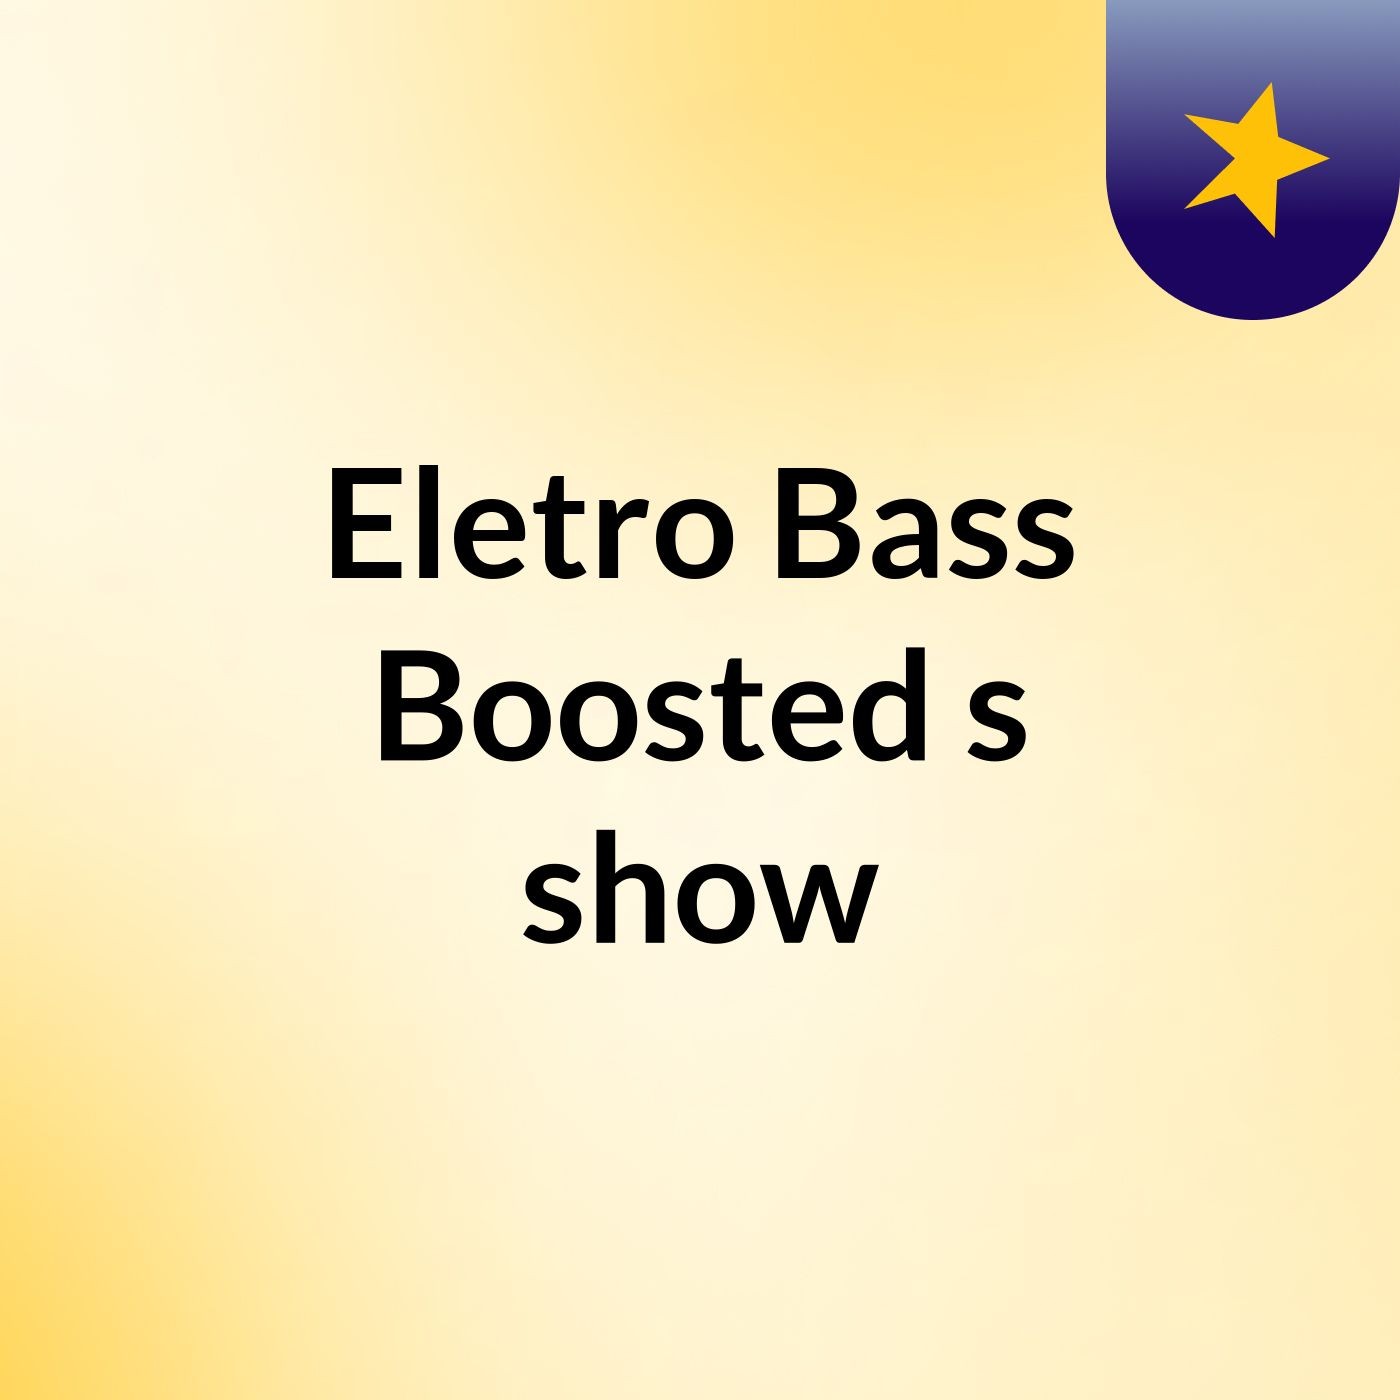 Eletro & Bass Boosted's show